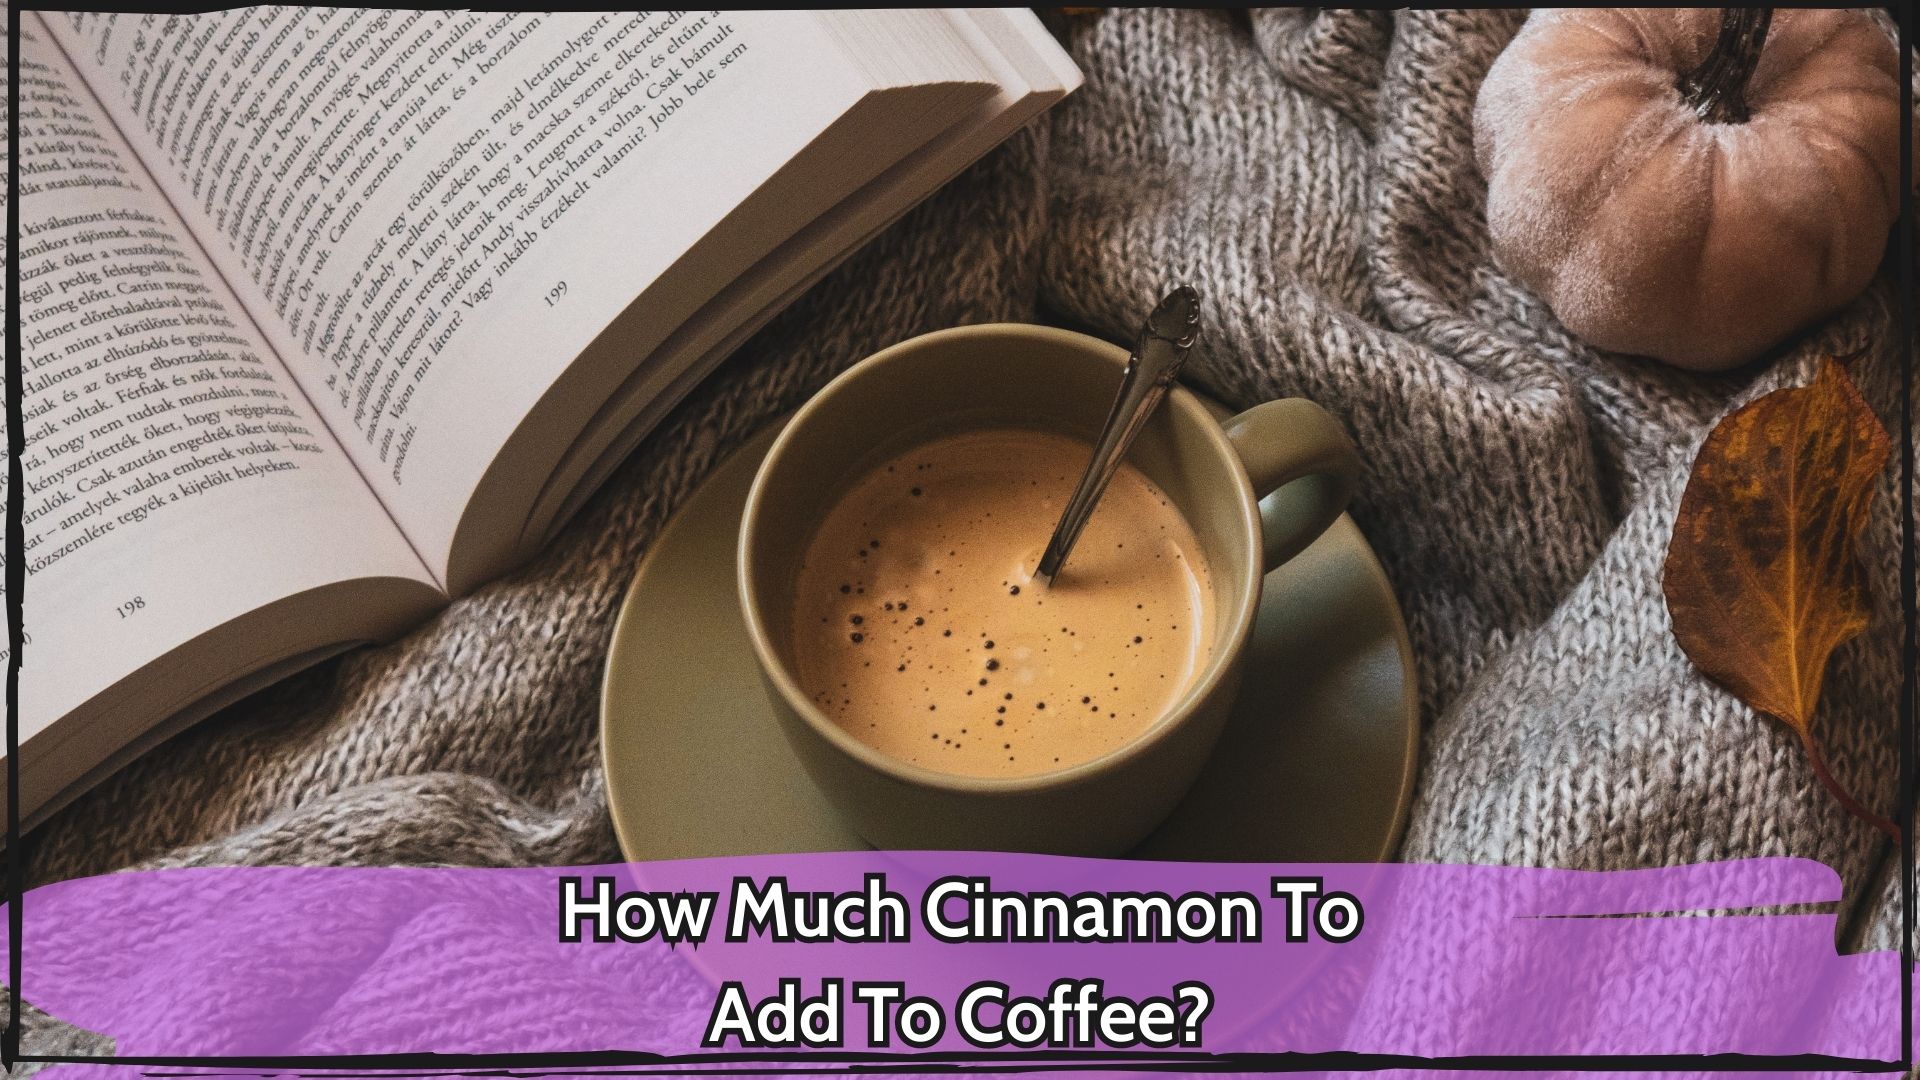 How Much Cinnamon To Add To Coffee?